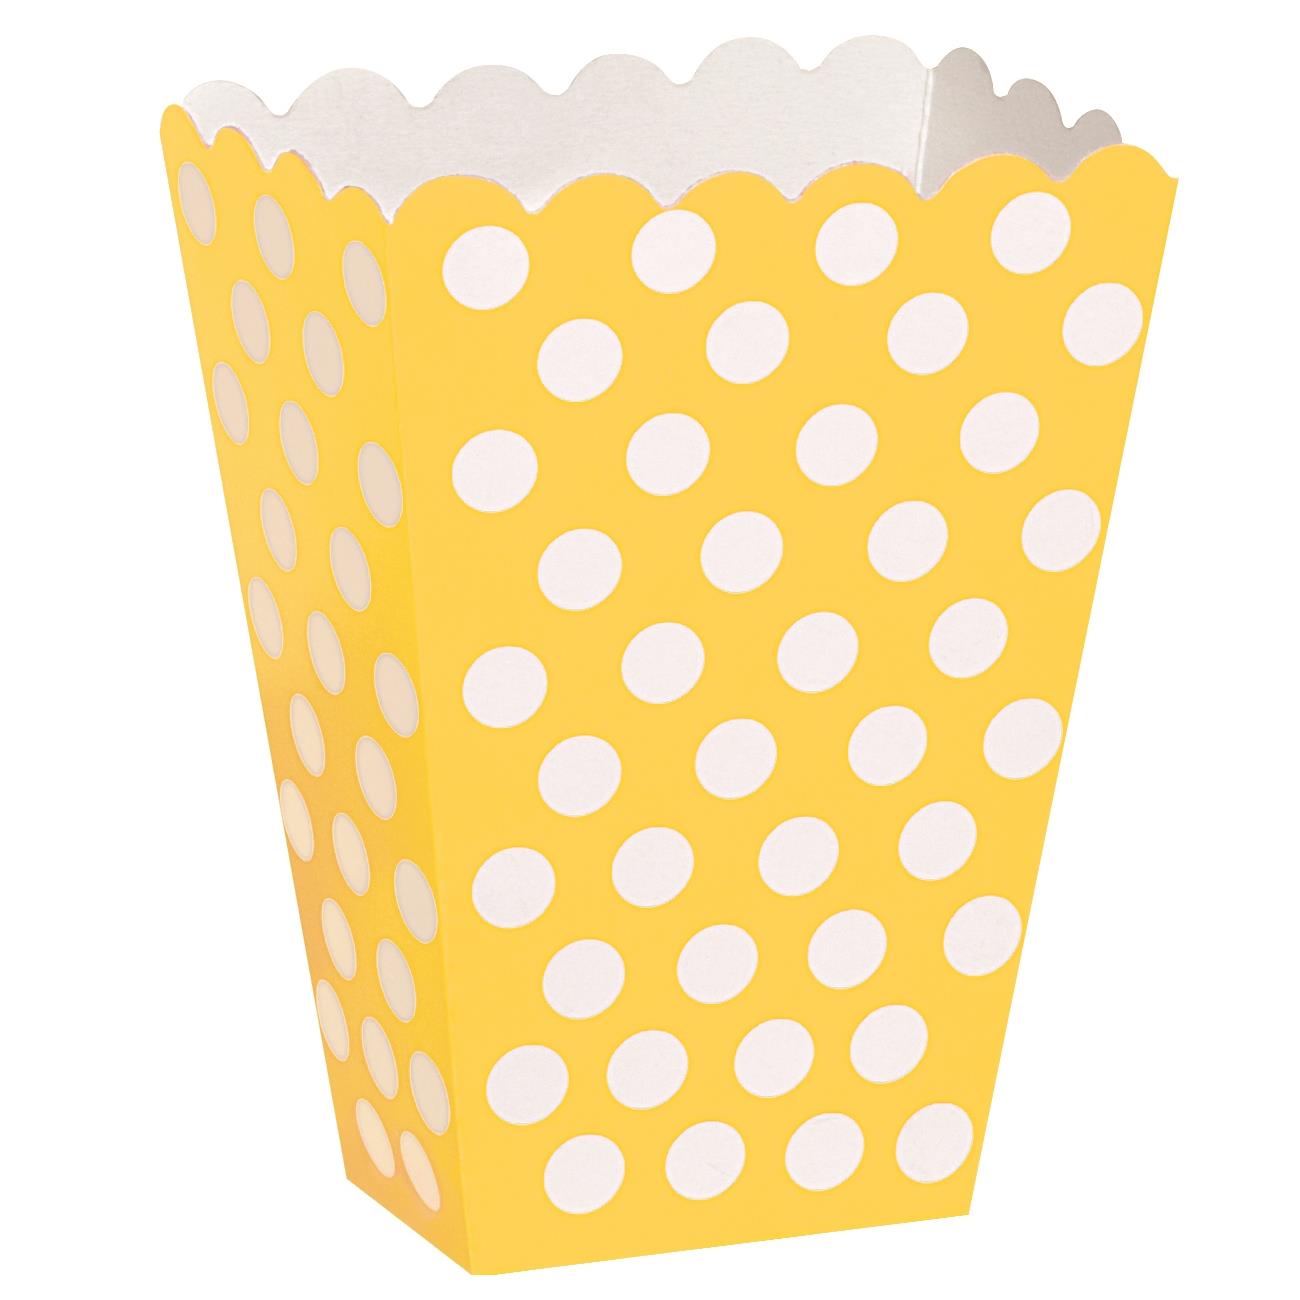 Sunflower Yellow Polka Dot Party Treat Boxes